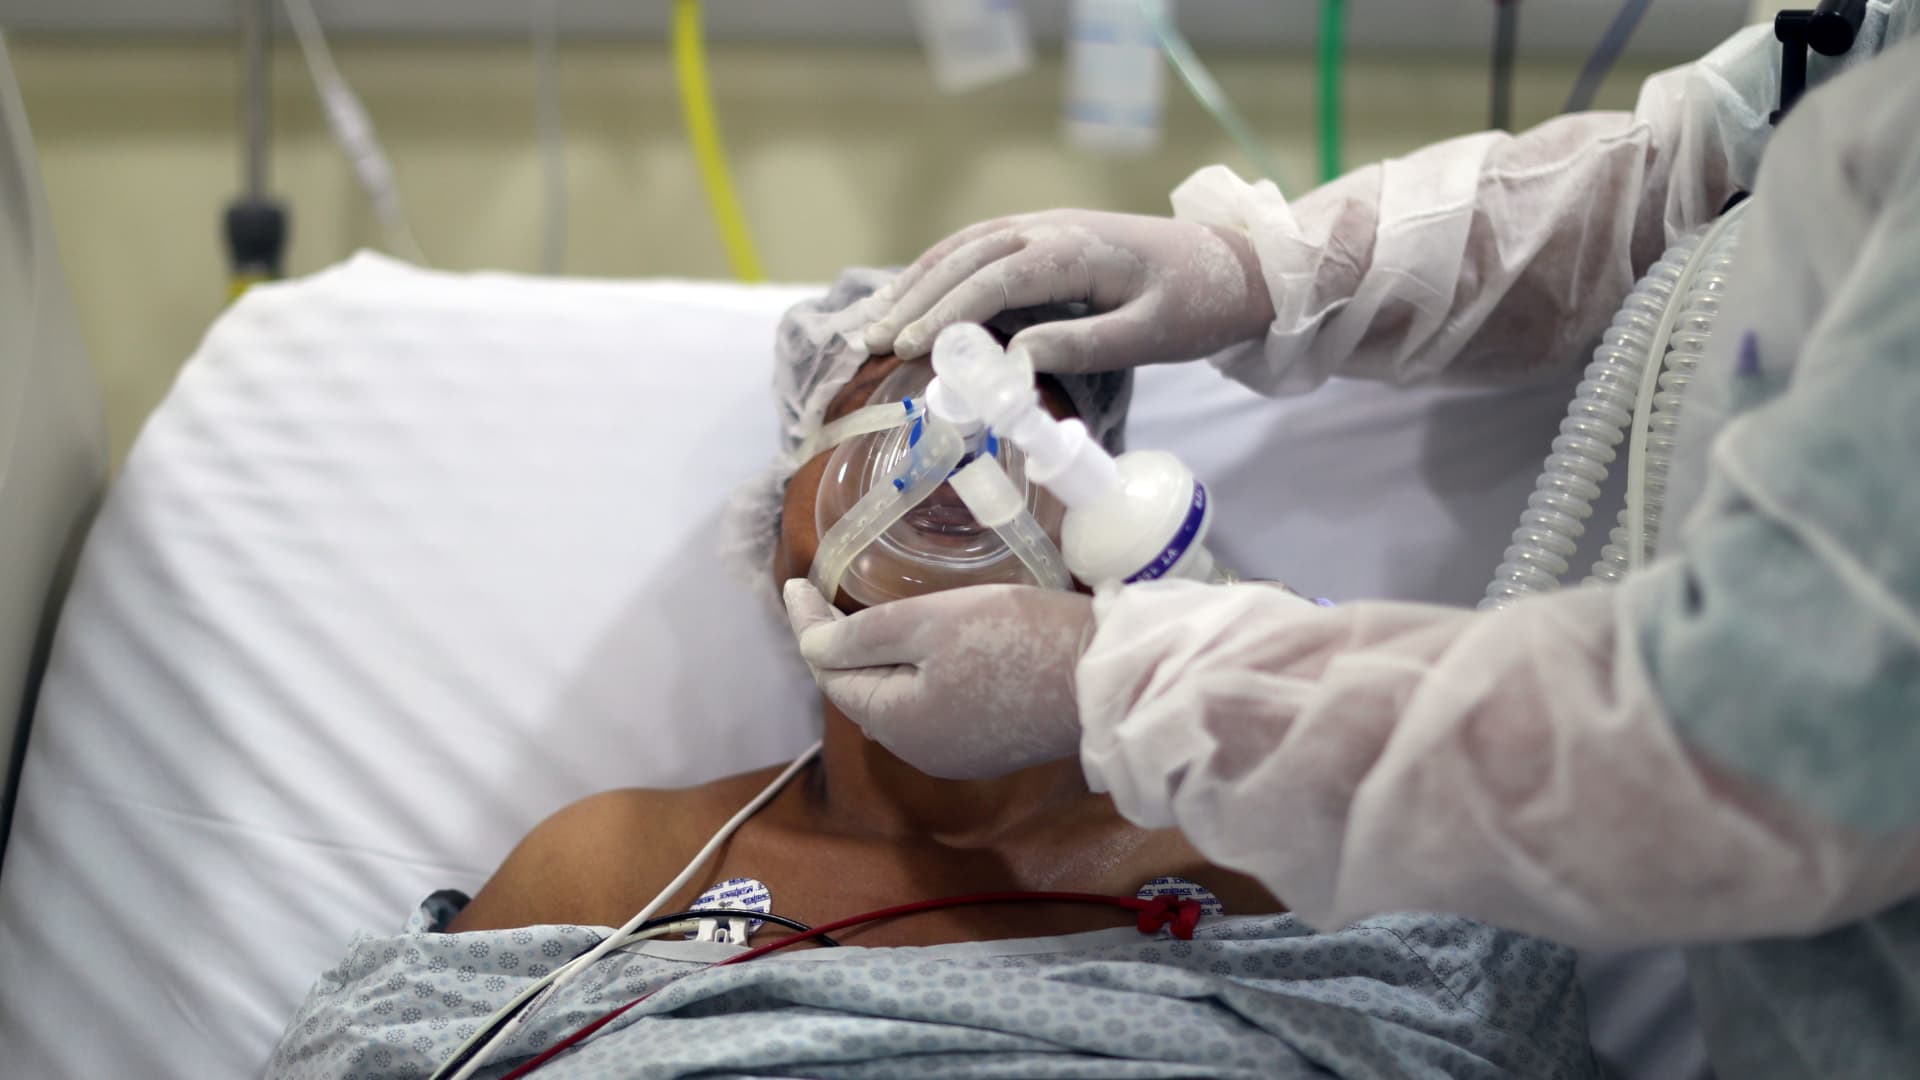 A physiotherapist adjusts an oxygen mask on a patient with coronavirus disease (COVID-19) disease at the ICU of Parelheiros Municipal Hospital in Sao Paulo, Brazil April 8, 2021.